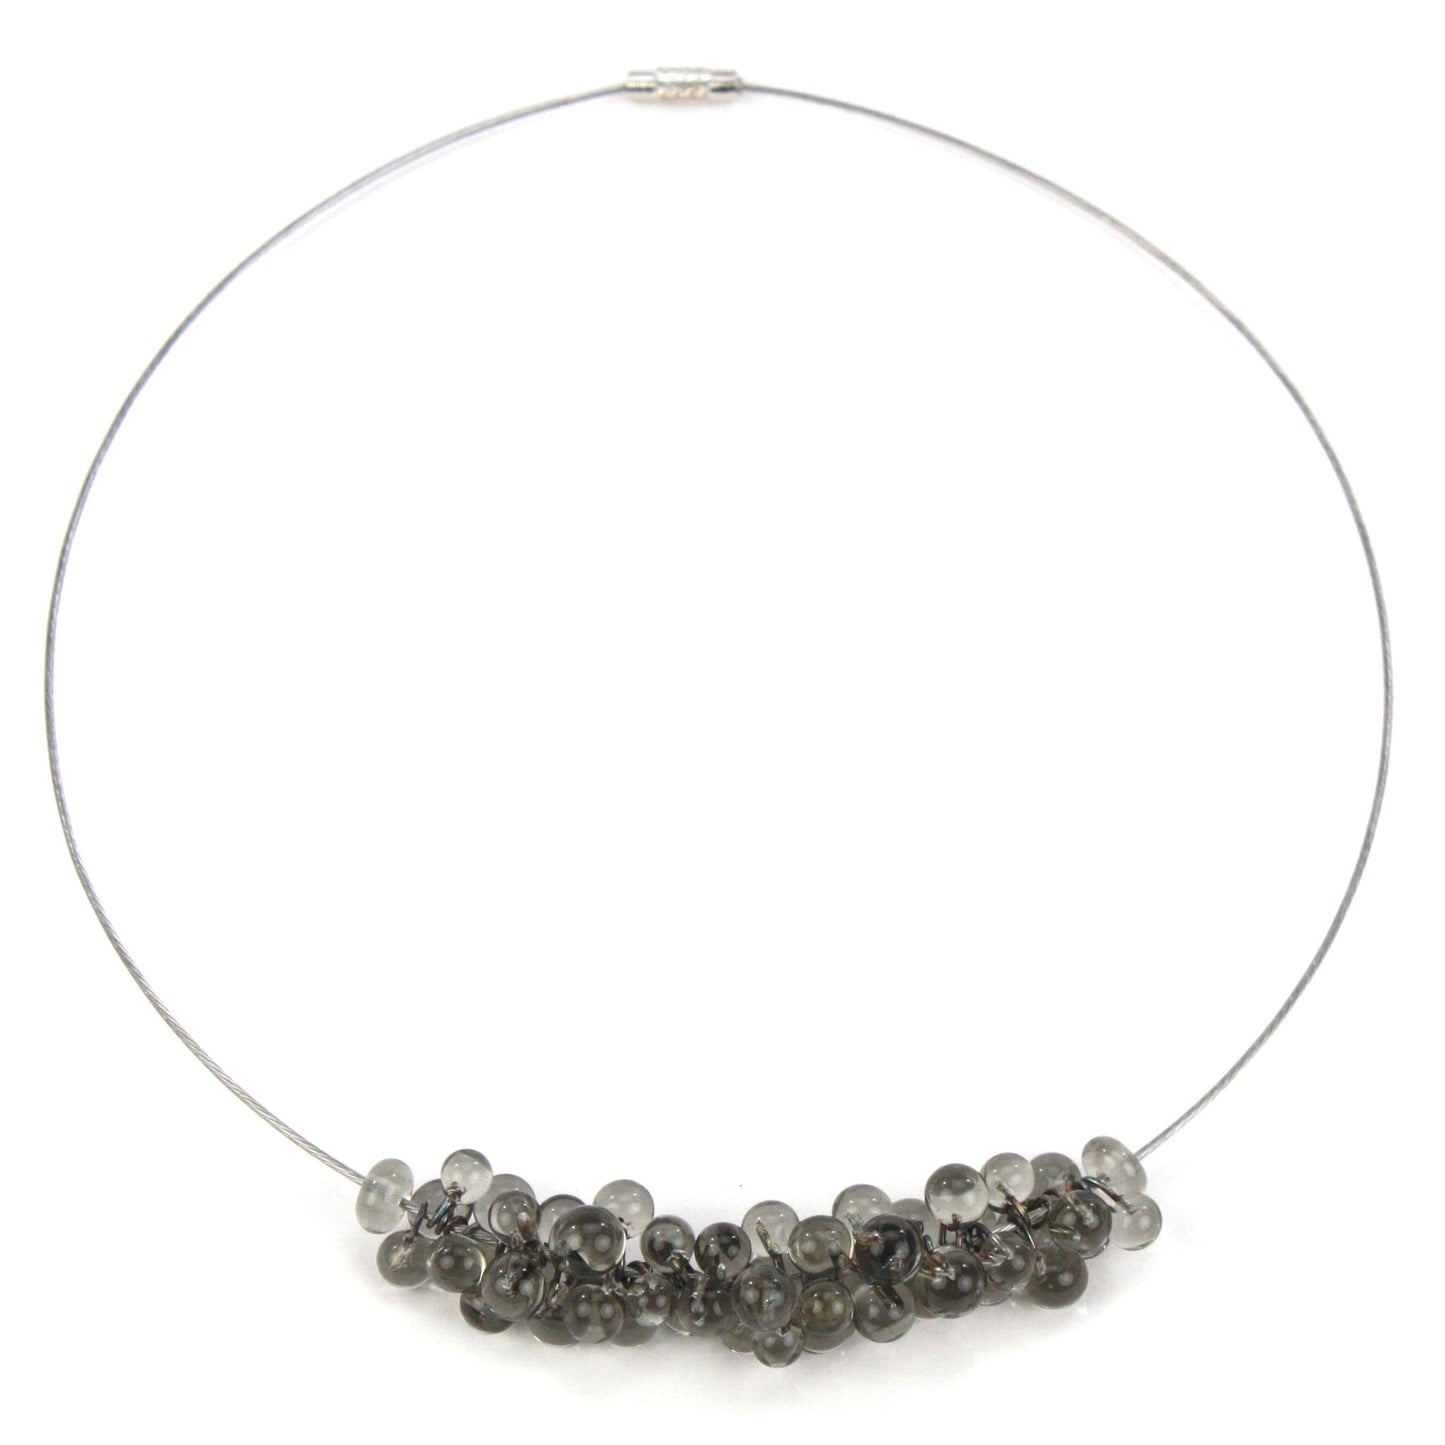 Petite Chroma Necklace in Grey